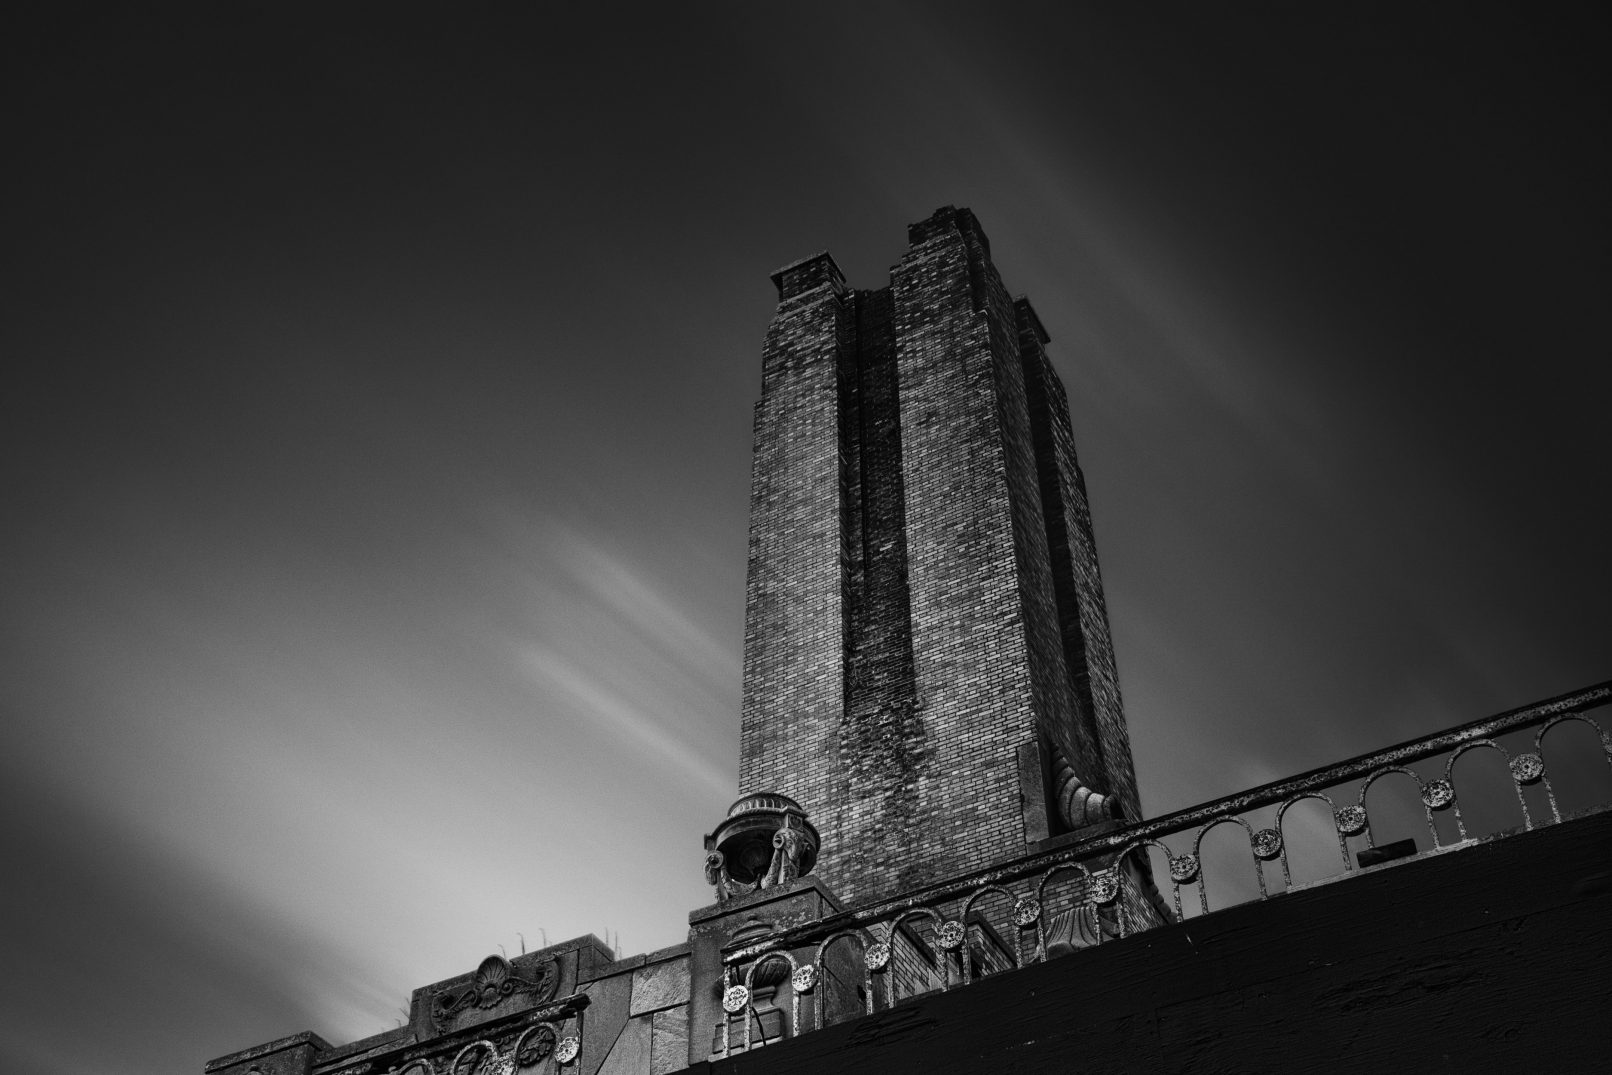 Old brick tower in Ocean Grove, New Jersey